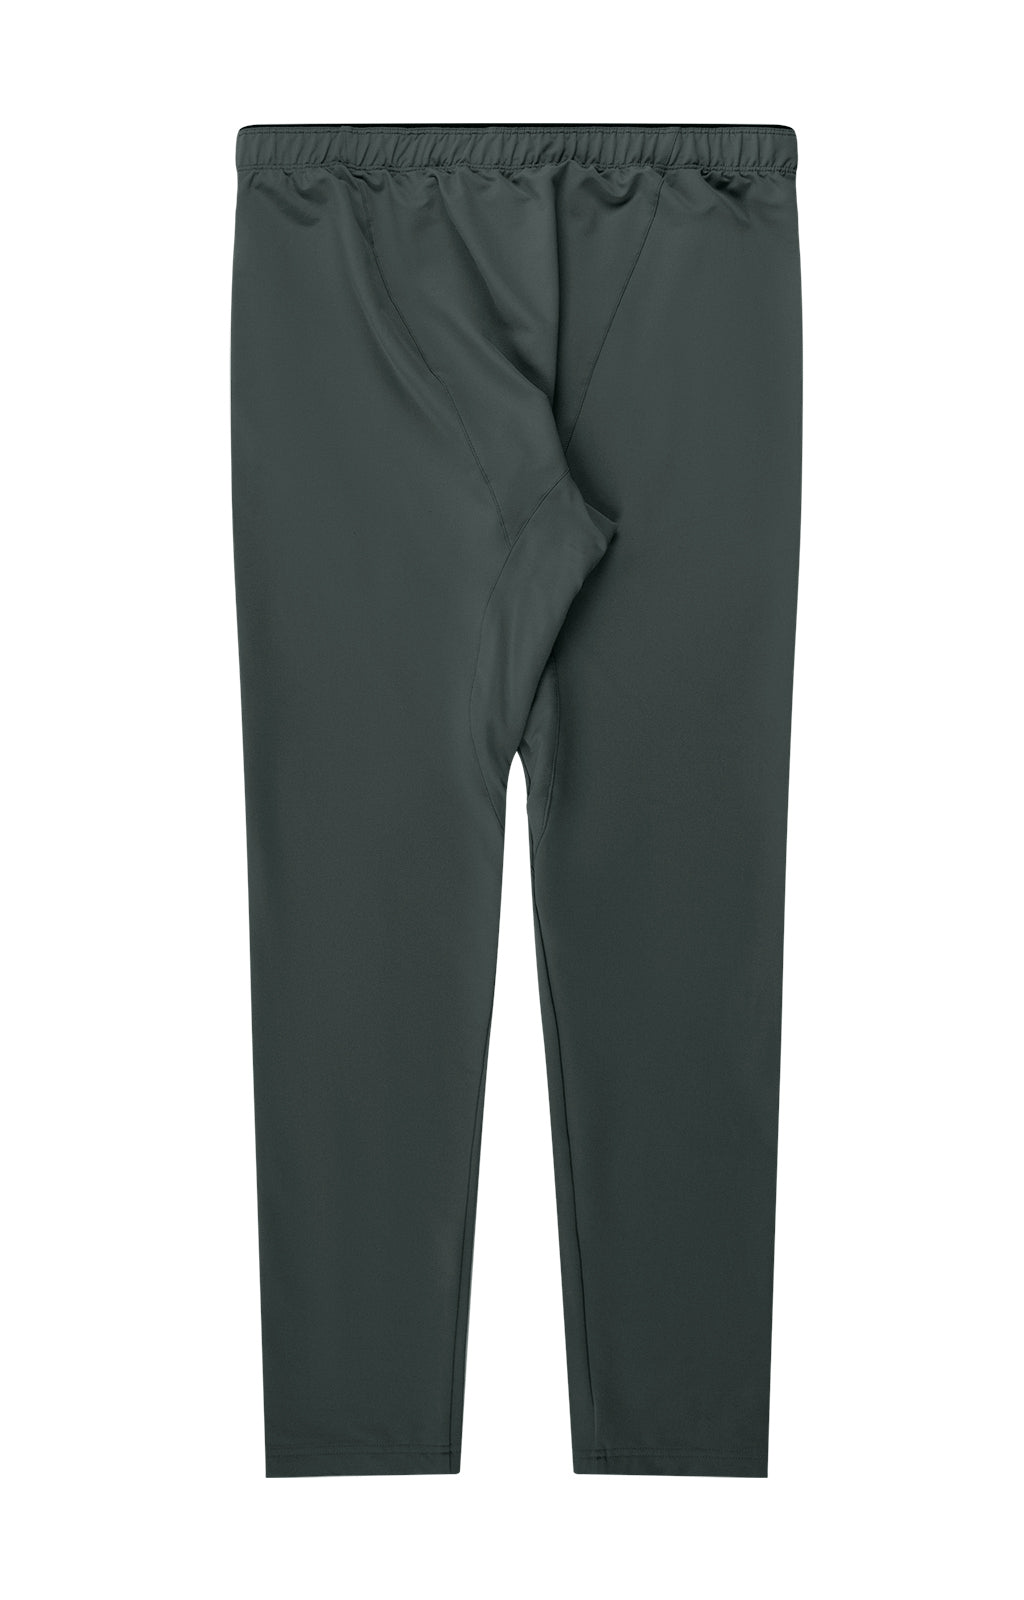 Realist - The Modern Tailored Travel Tech Pants in Peat